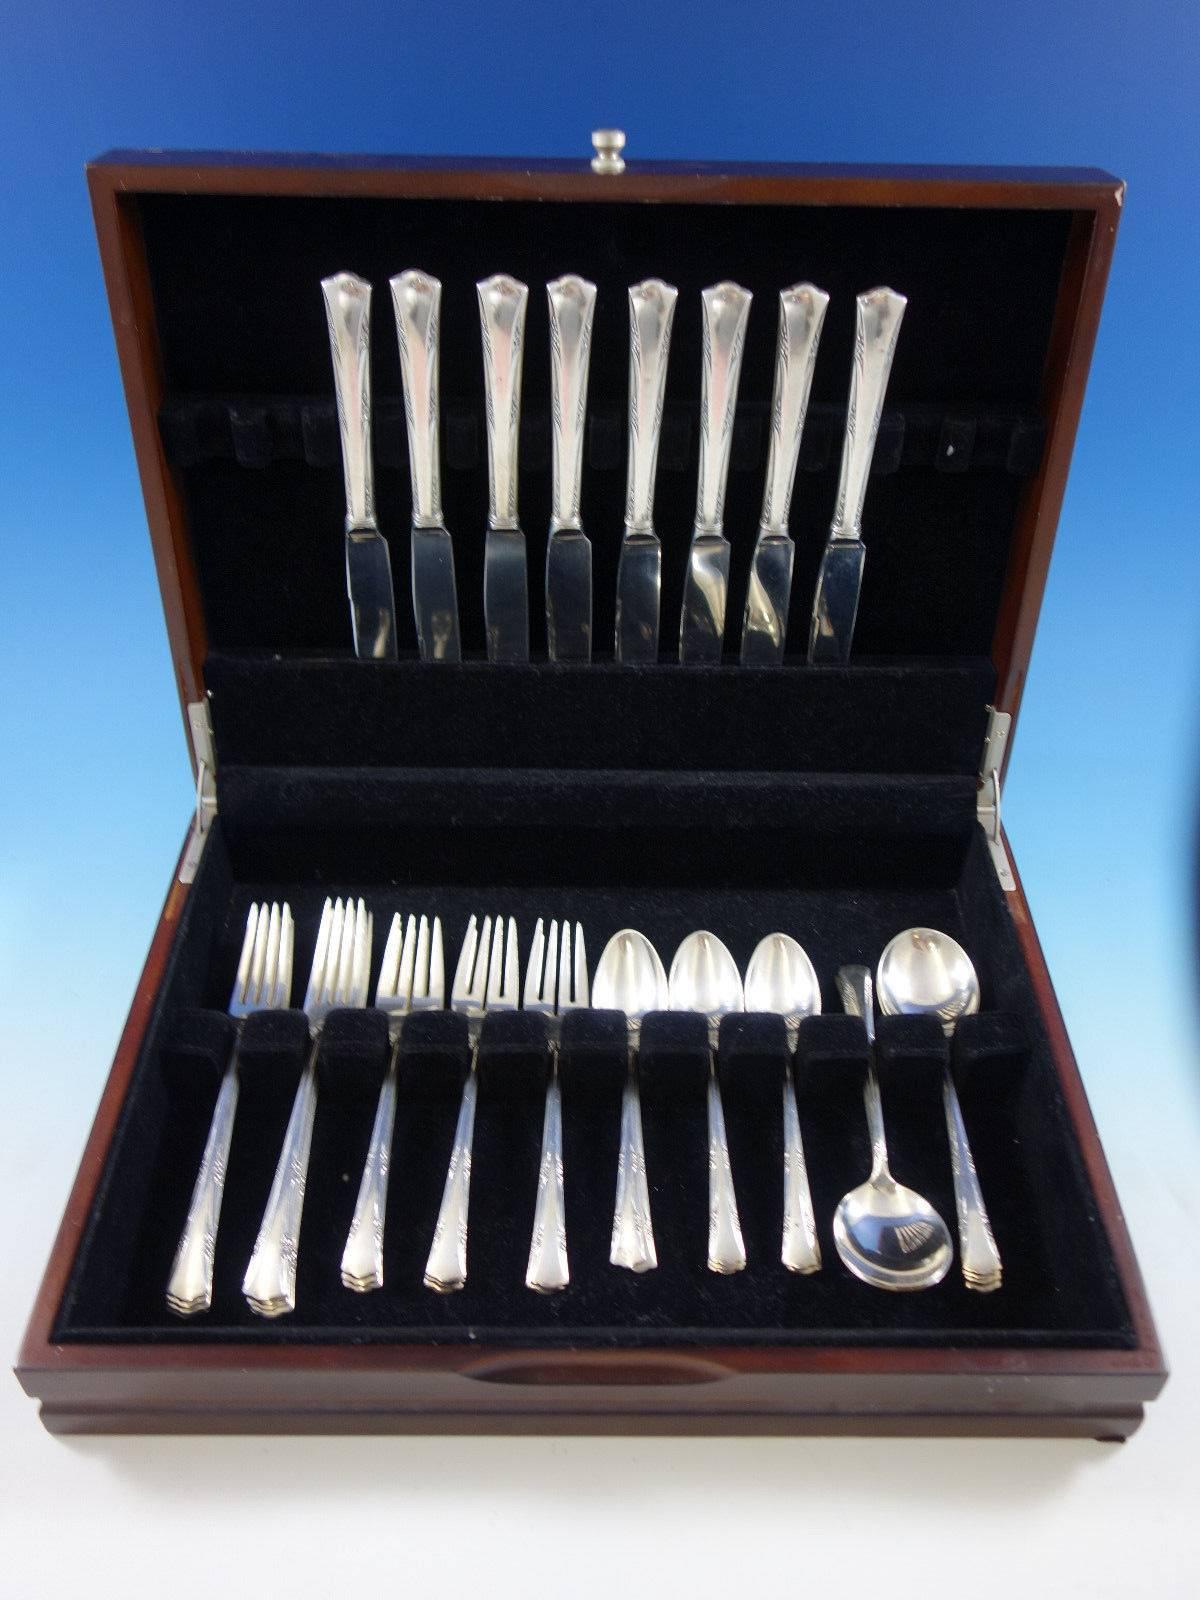 Greenbrier by Gorham sterling silver flatware set - 40 pieces. This set includes: 

Eight knives, 9